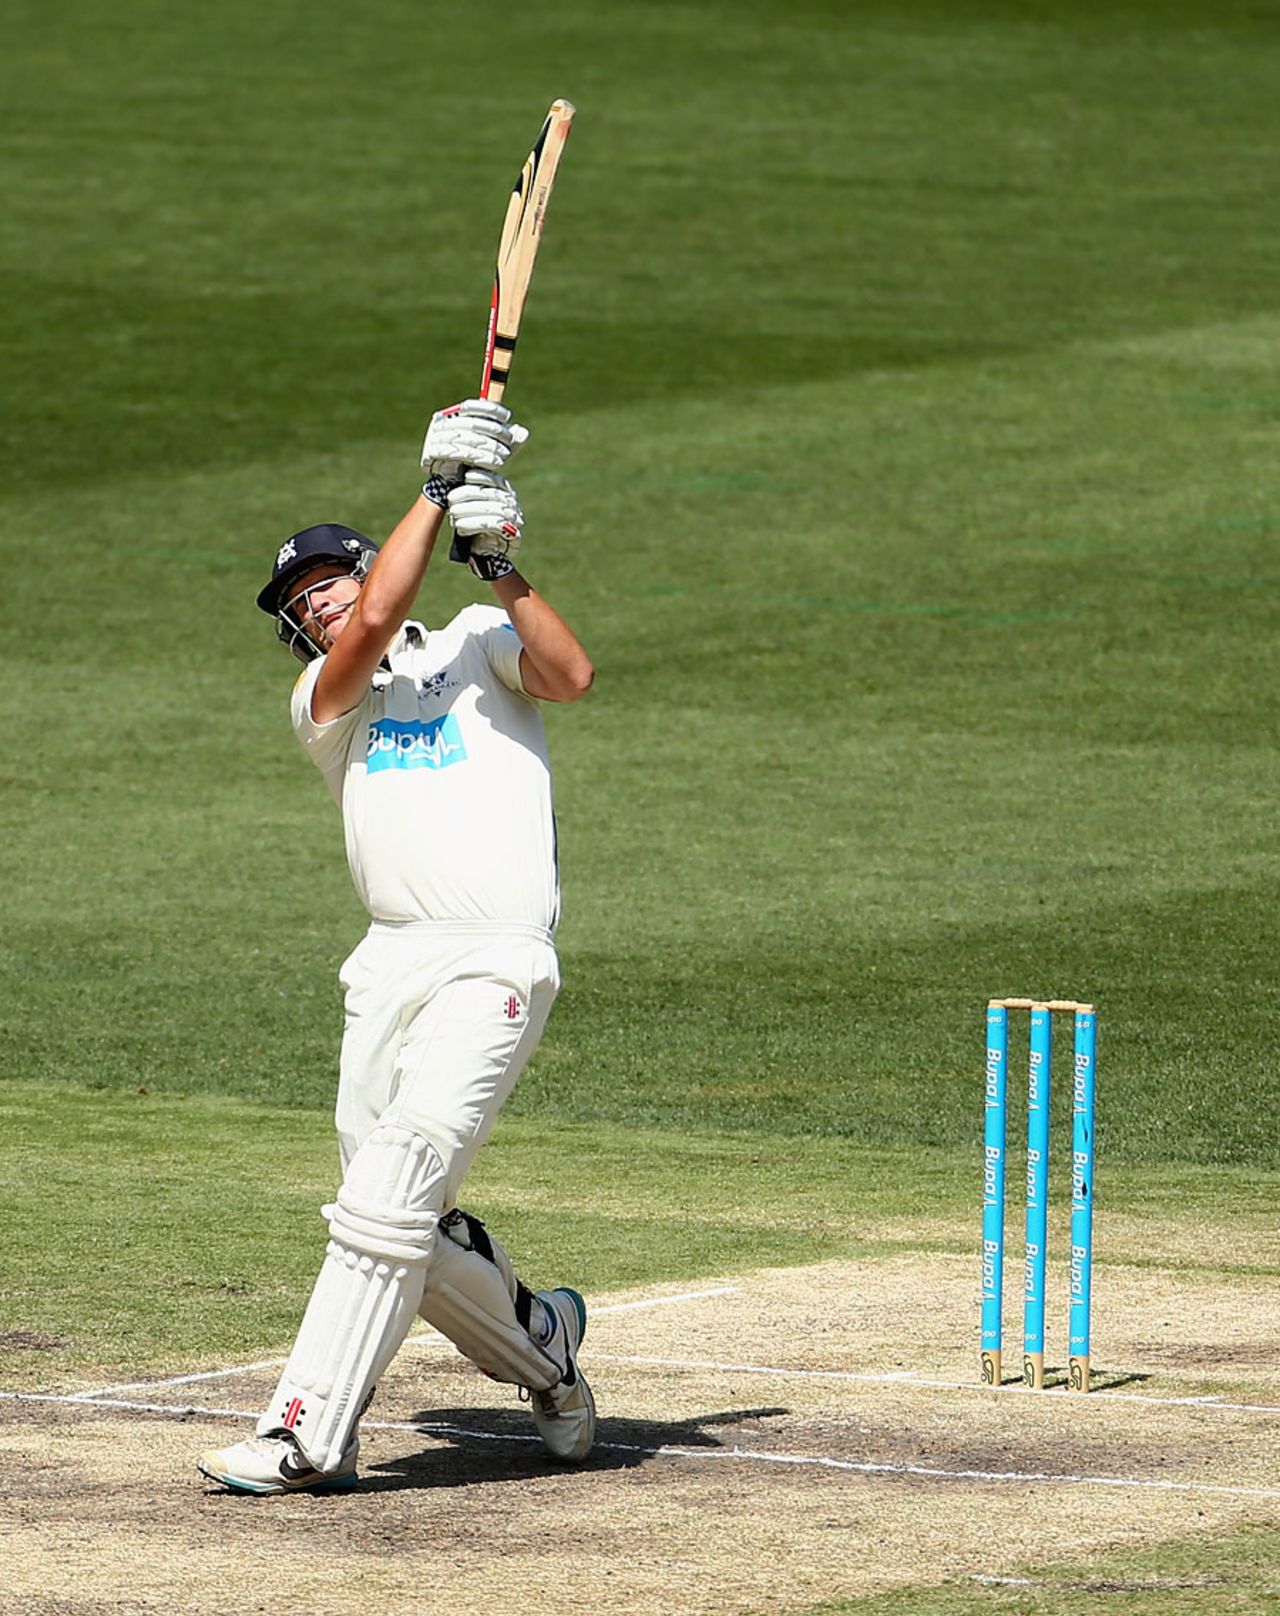 Cameron White scored a first-class century for the first time since 2010, Victoria v Queensland, Sheffield Shield, Melbourne, February 20, 2013